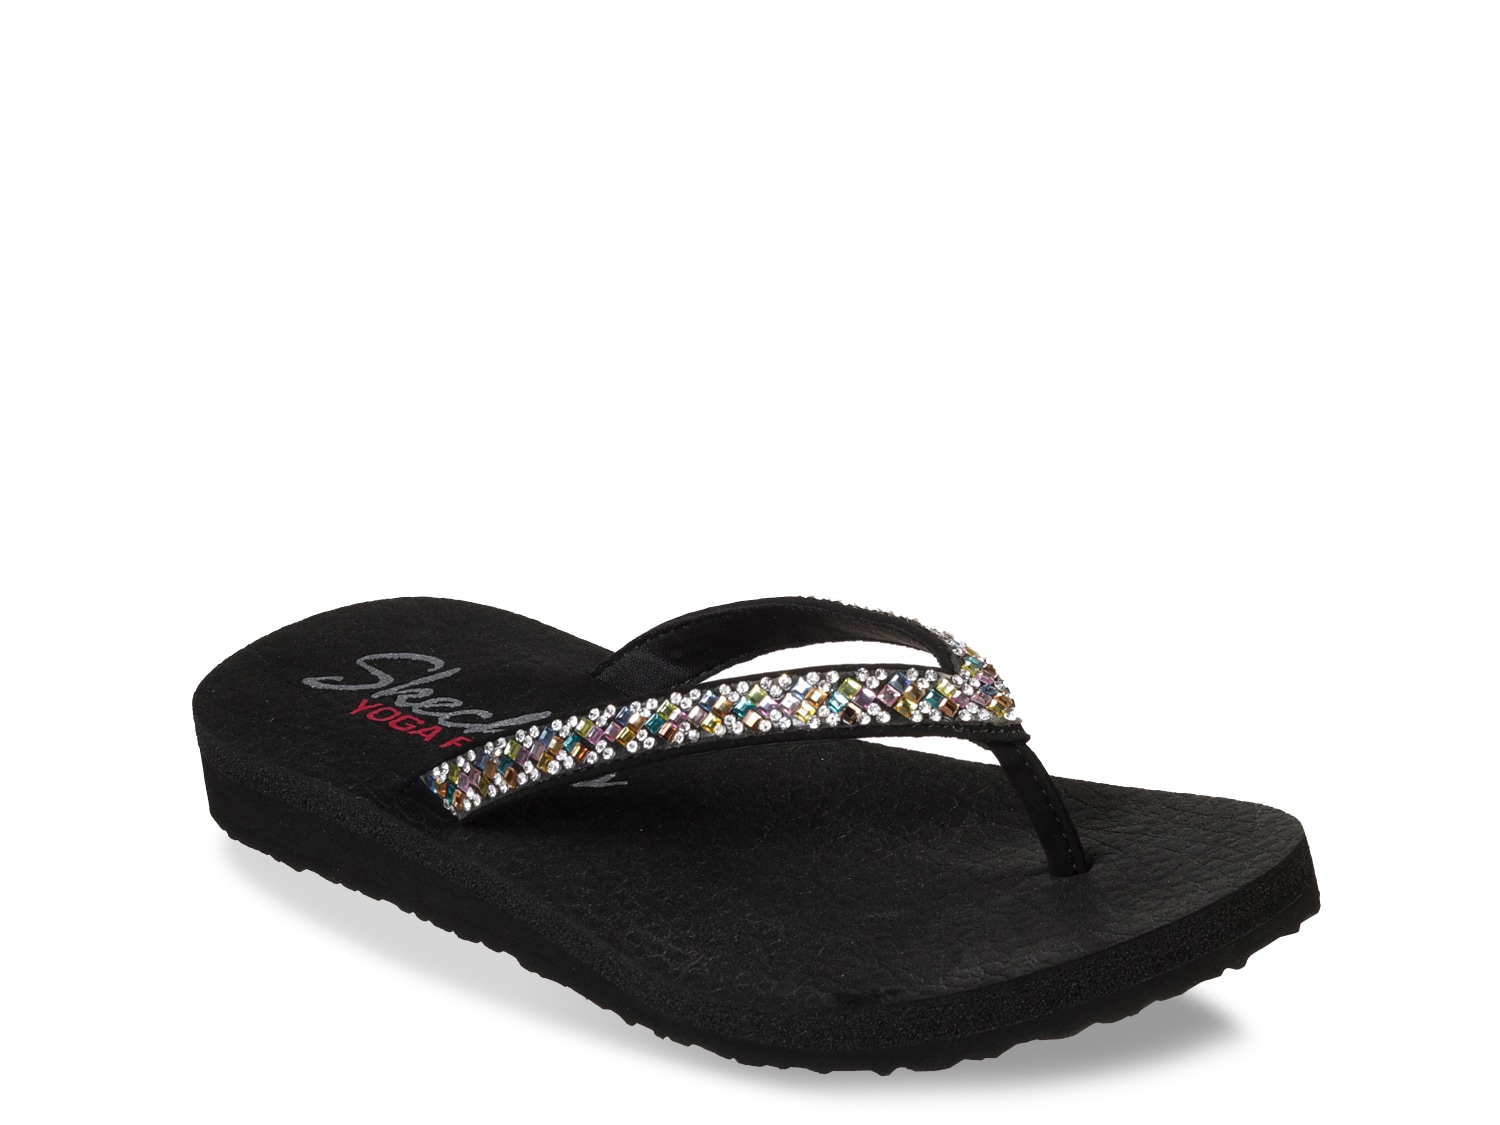 Meditation Perfect 10 Flip Flop Free Shipping | DSW